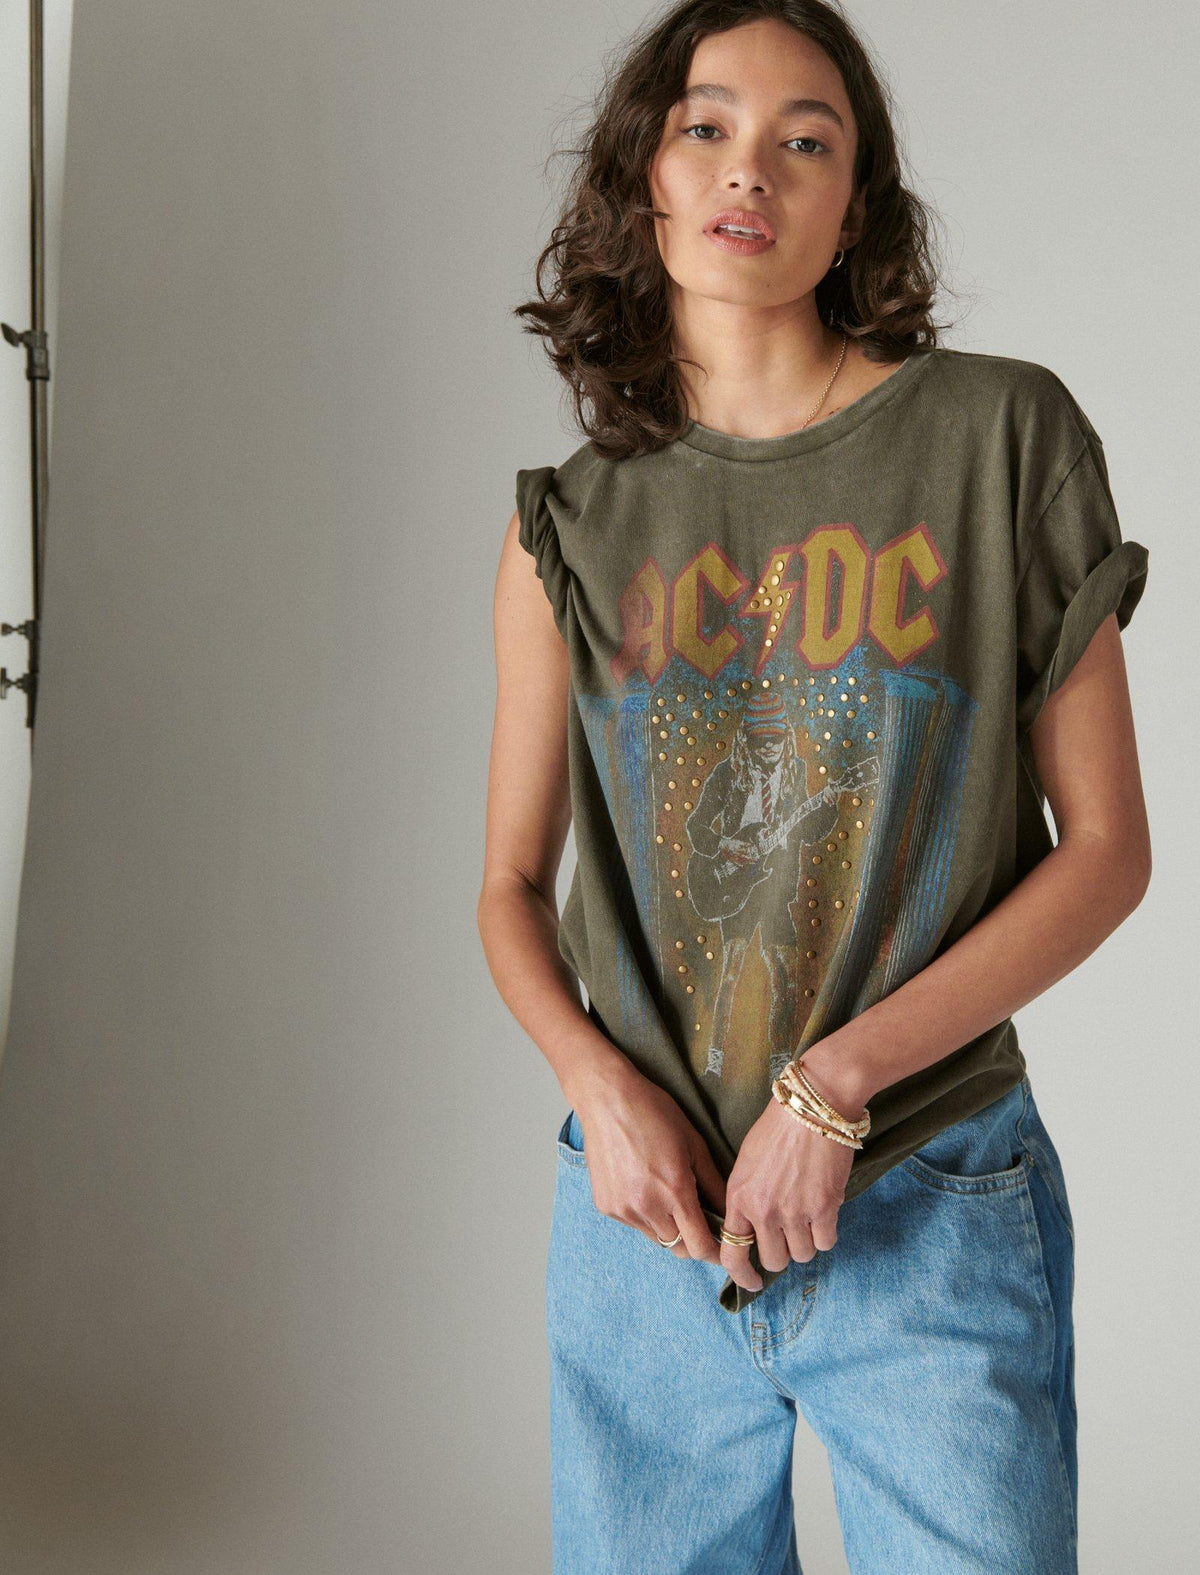 Lucky Brand Acdc Studs Boyfriend Tee - Women's Clothing Tops Shirts Tee Graphic T Shirts Black Olive